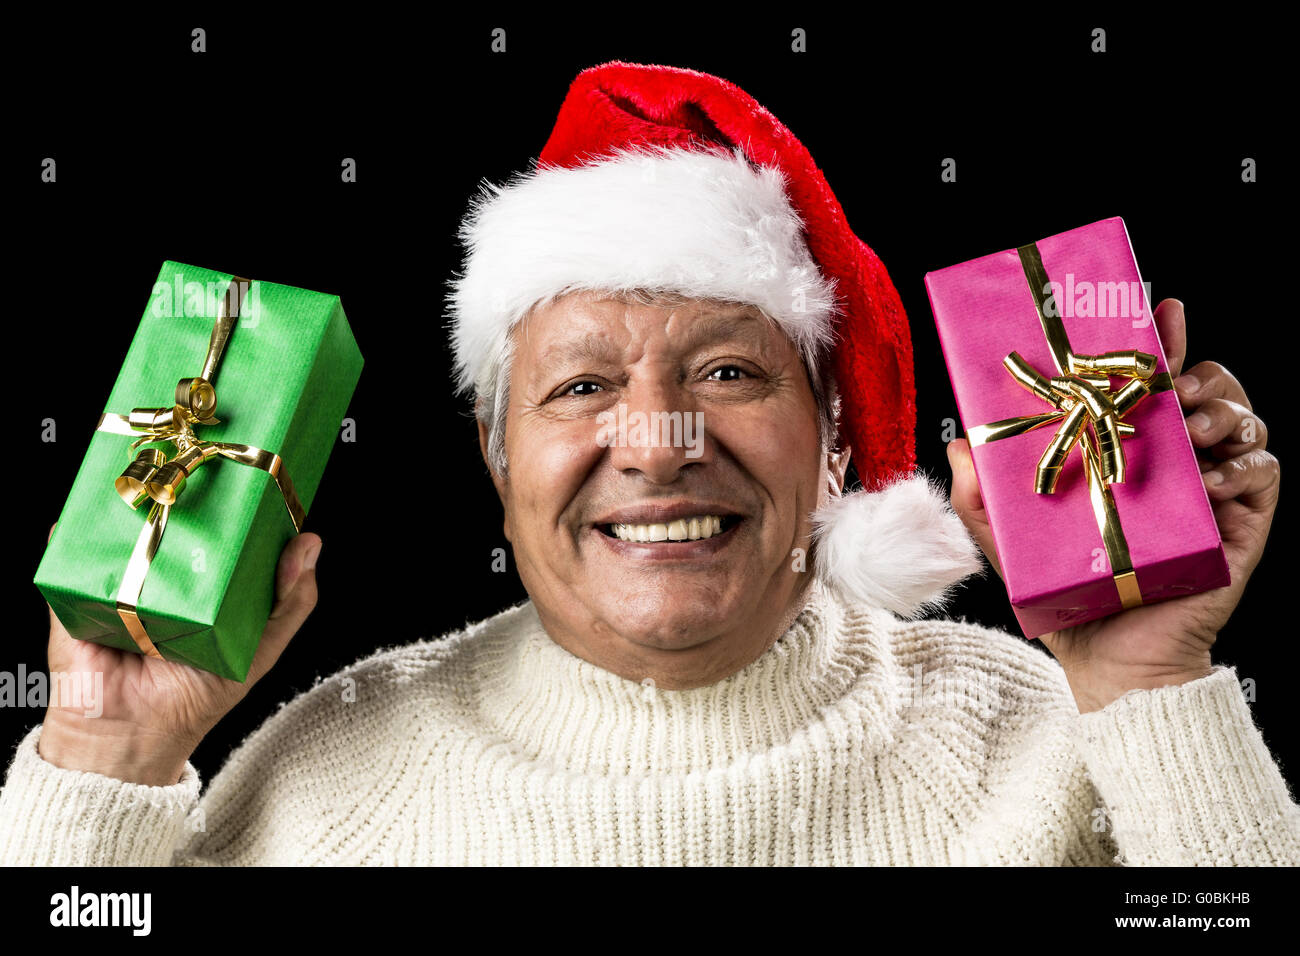 Hilarious Senior Offering Green And Pink Gift Stock Photo